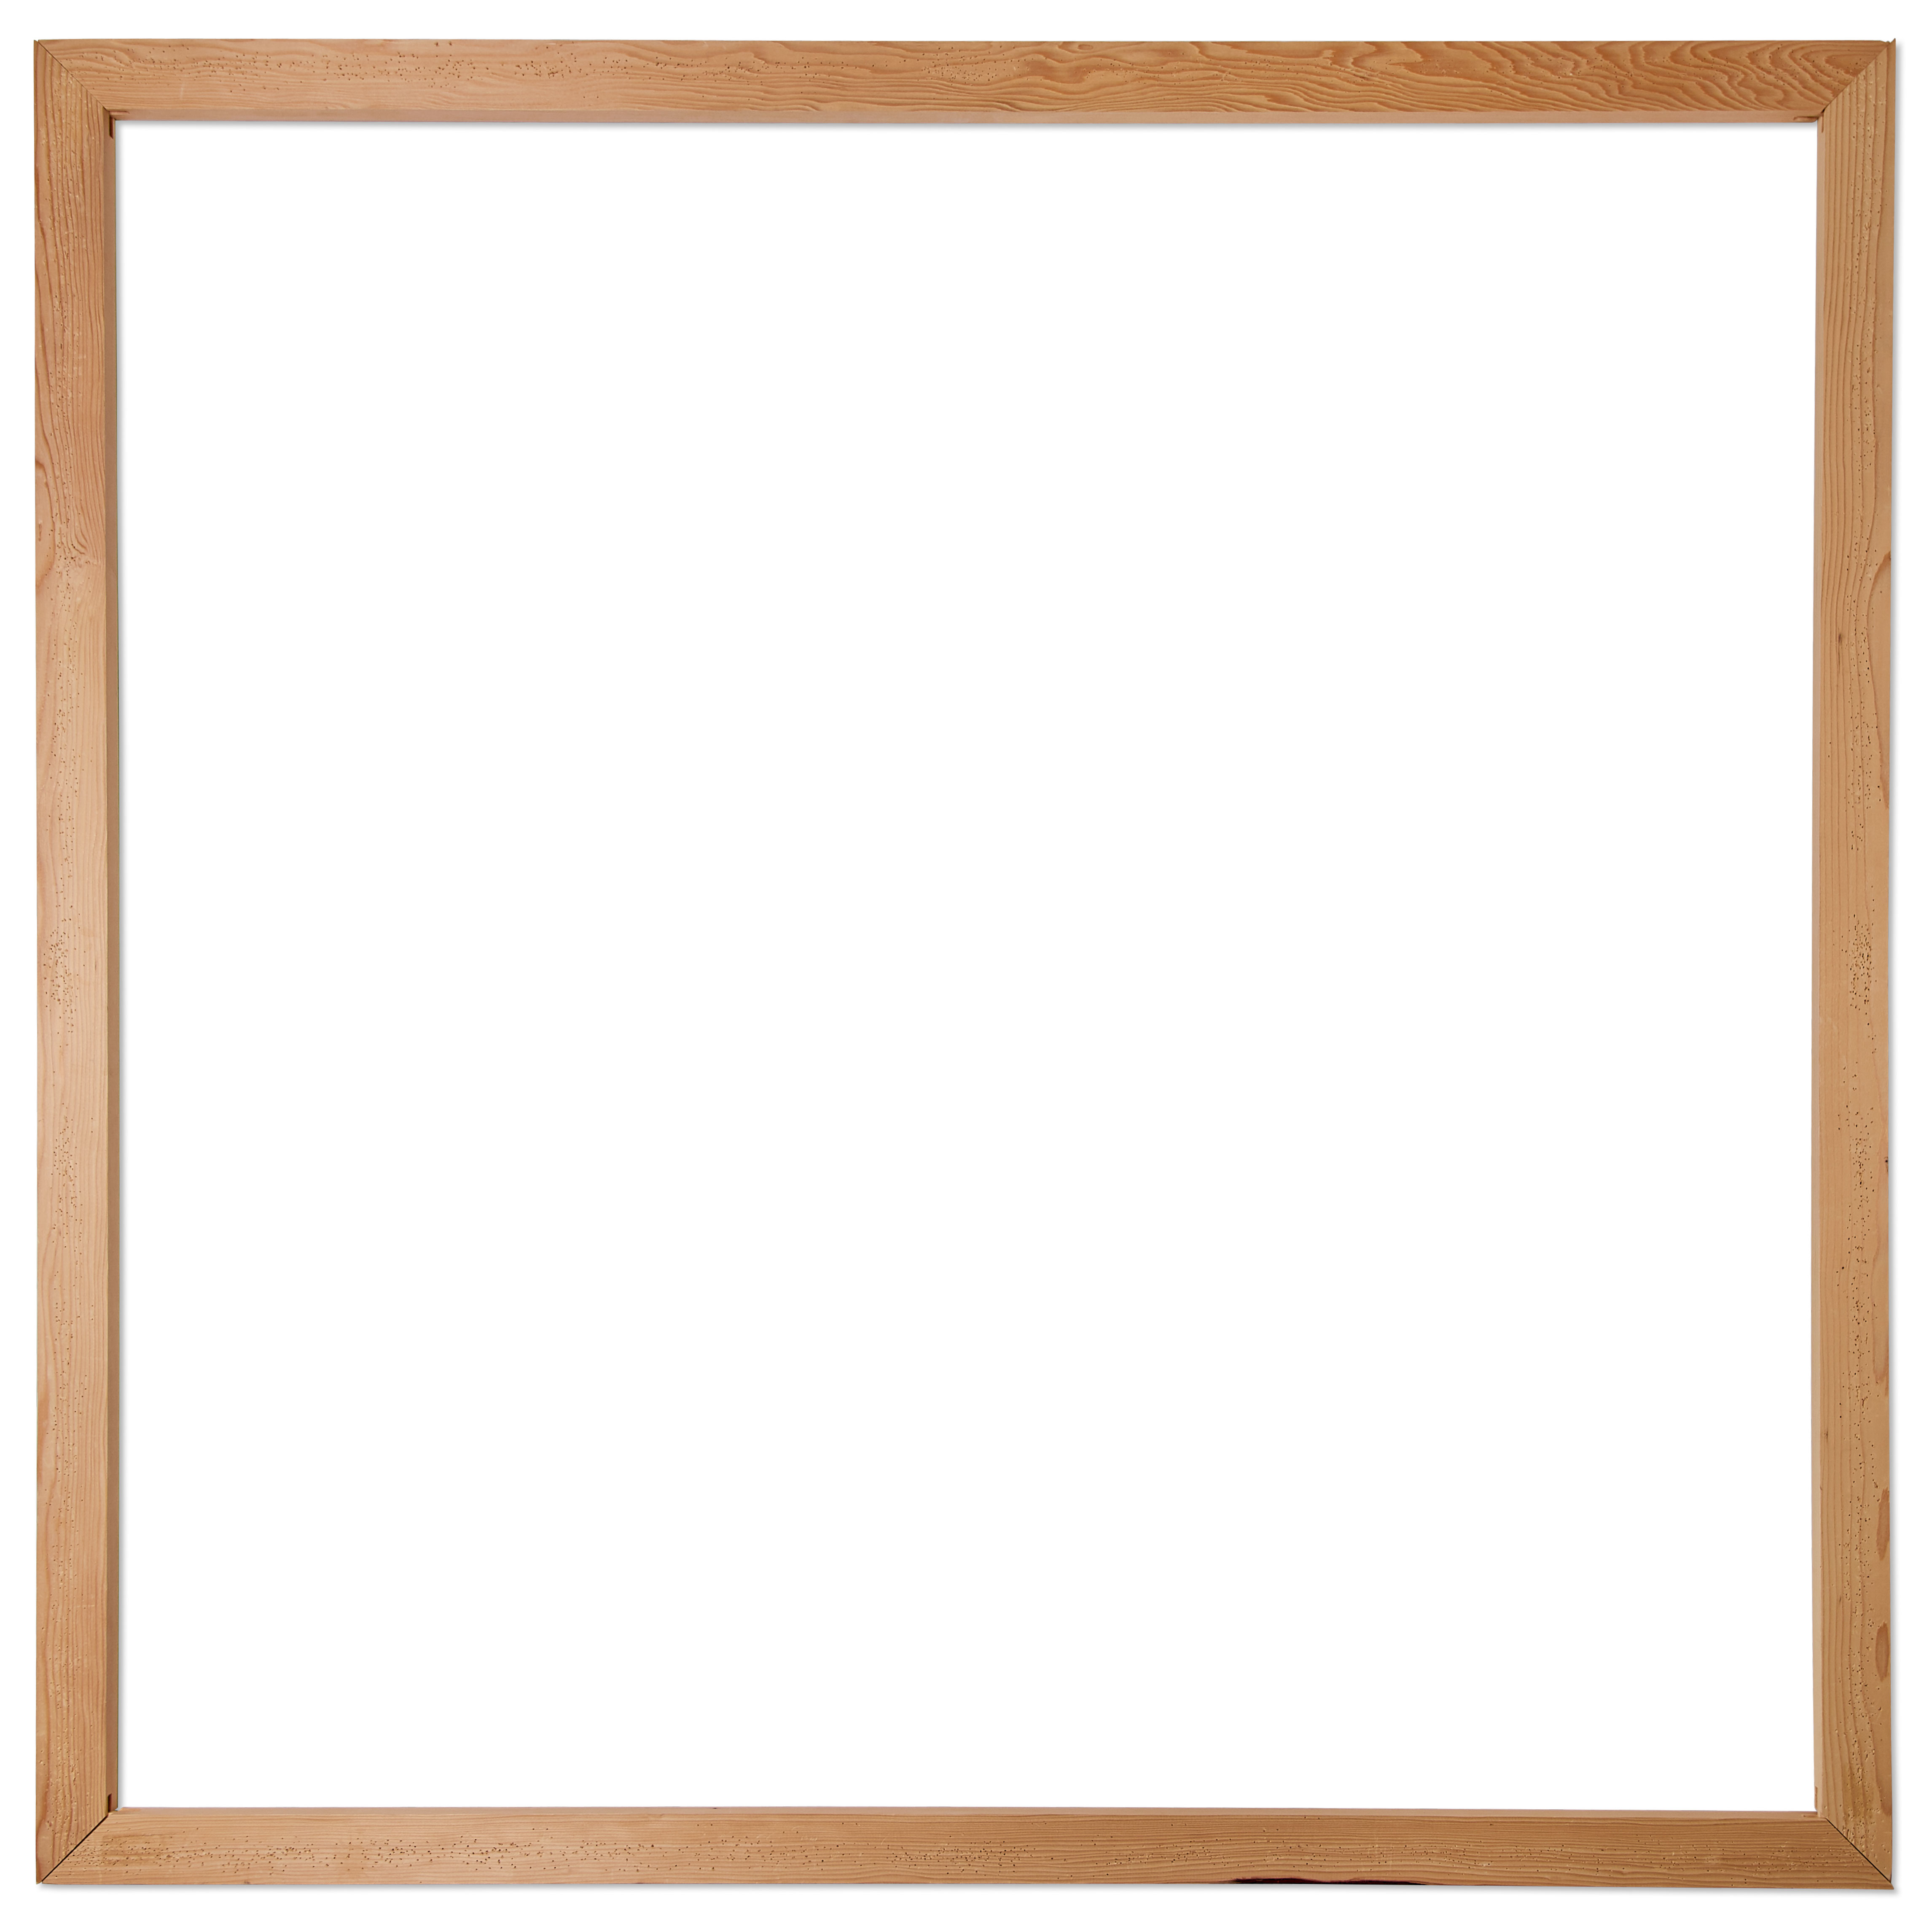 A photograph of an artwork by artist Caroline Coolidge showing a wooden frame with nothing in it on a white background.